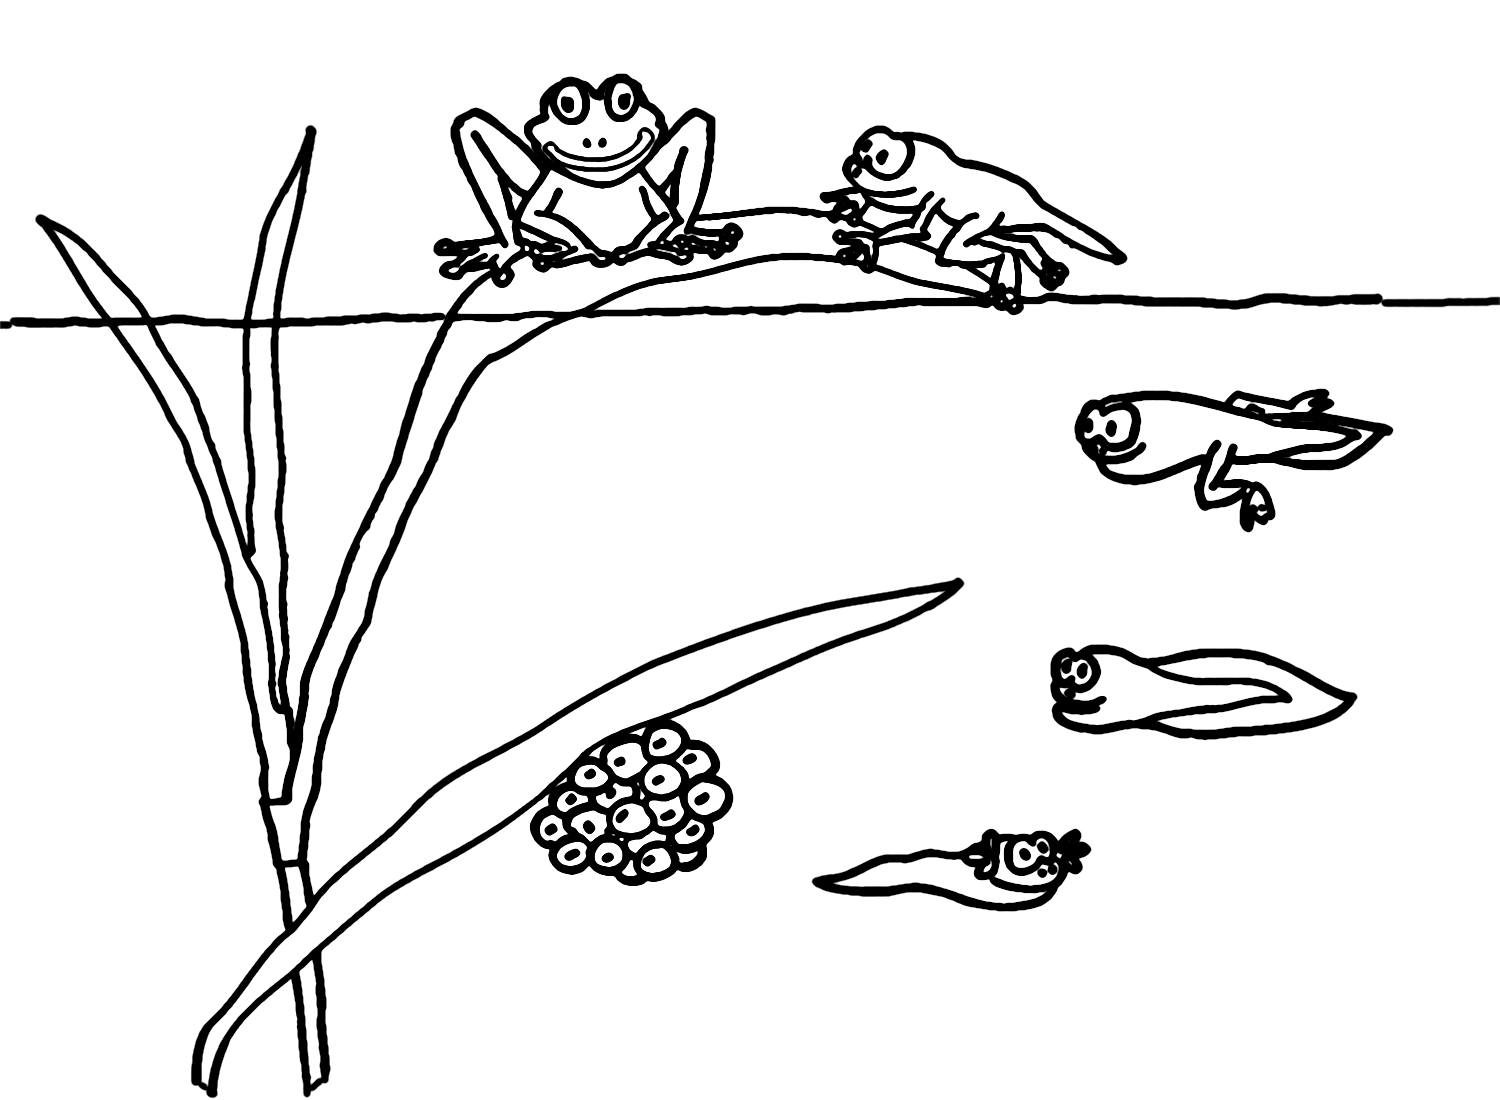 Frog Tadpole Life Cycle from Tadpole